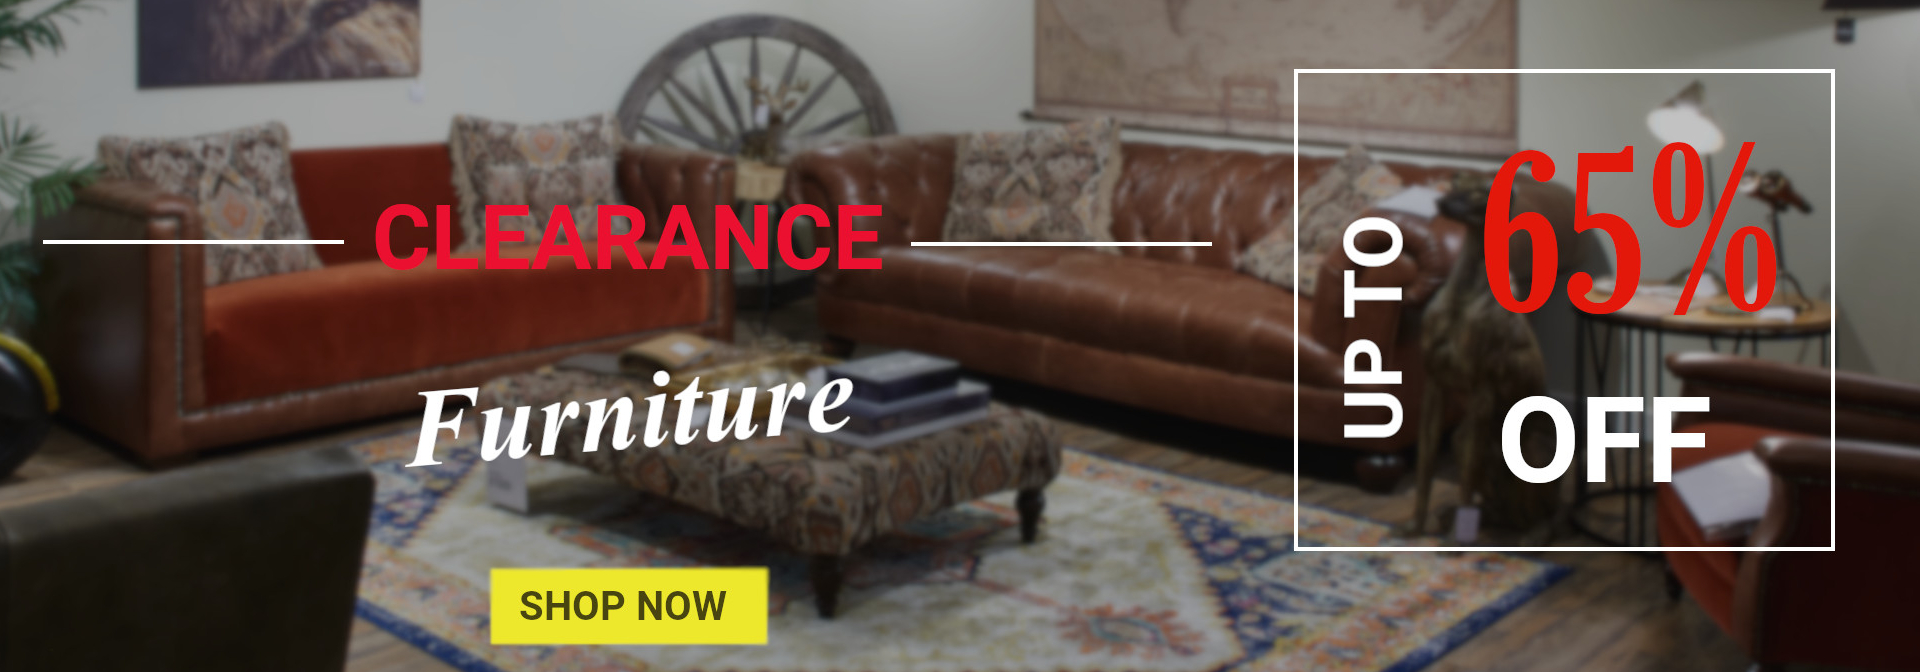 Clearance Furniture Shop Now